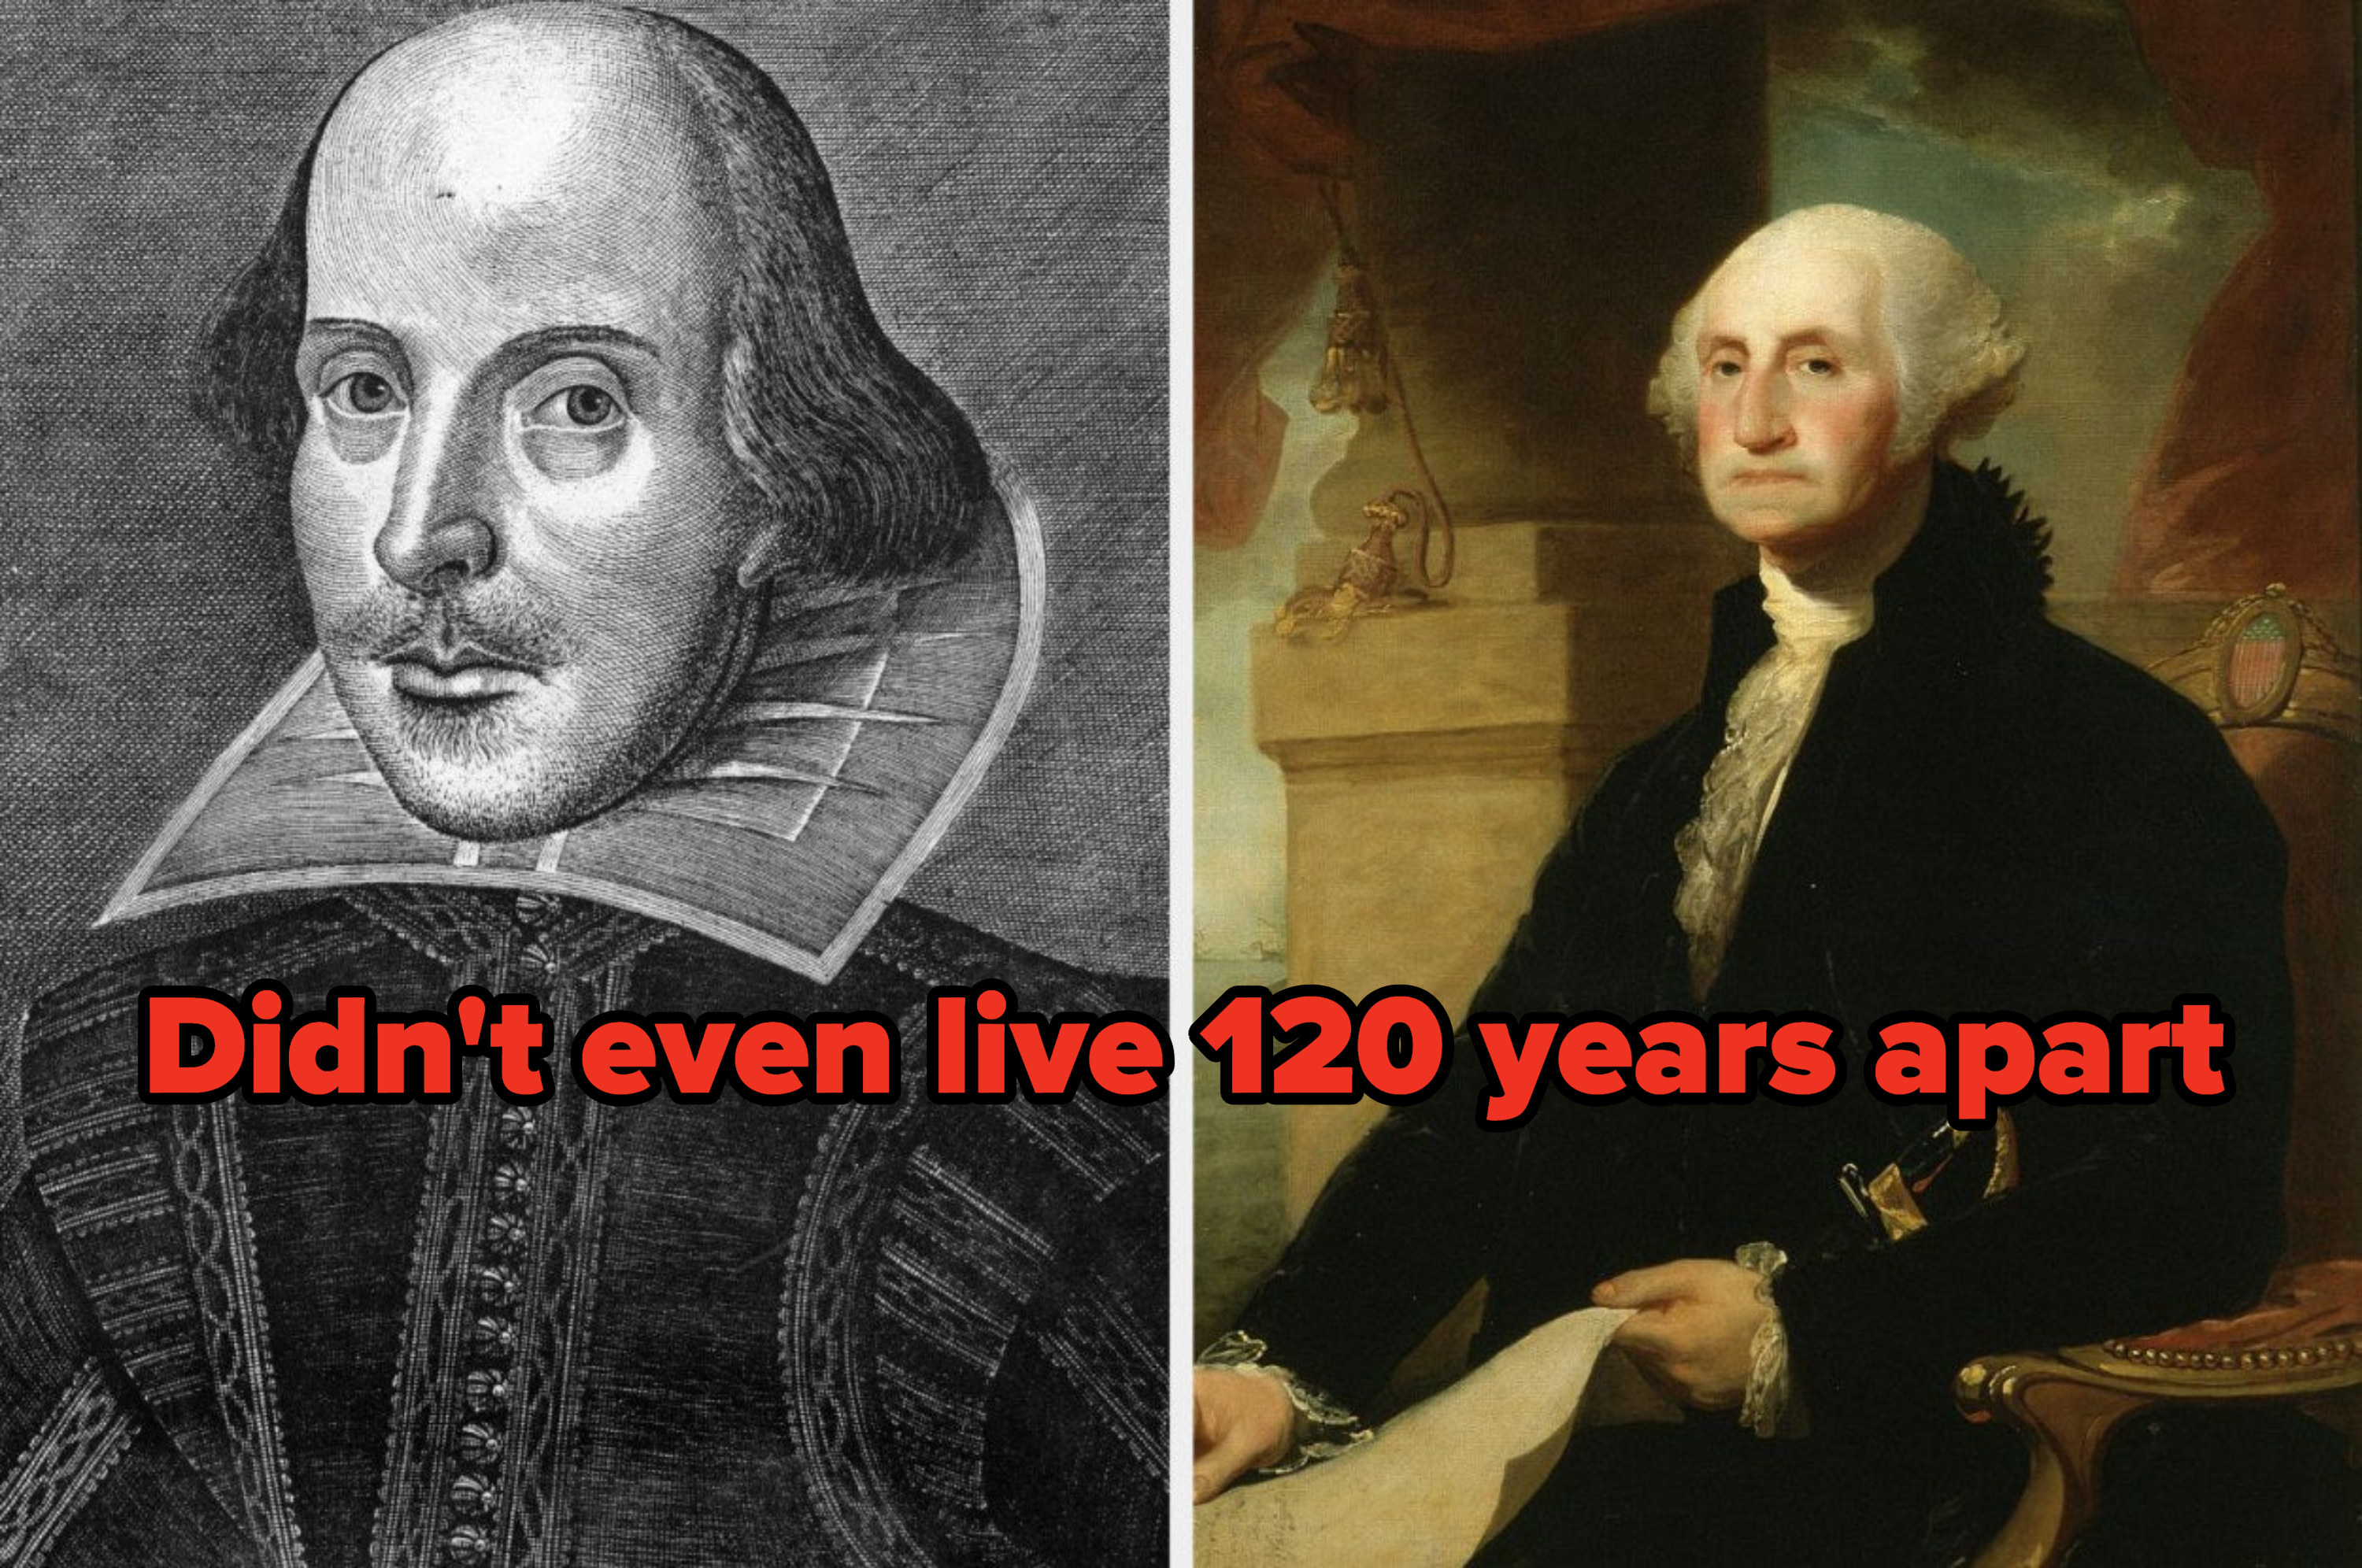 Didn&#x27;t even live 120 years apart written over William Shakespeare and George Washington